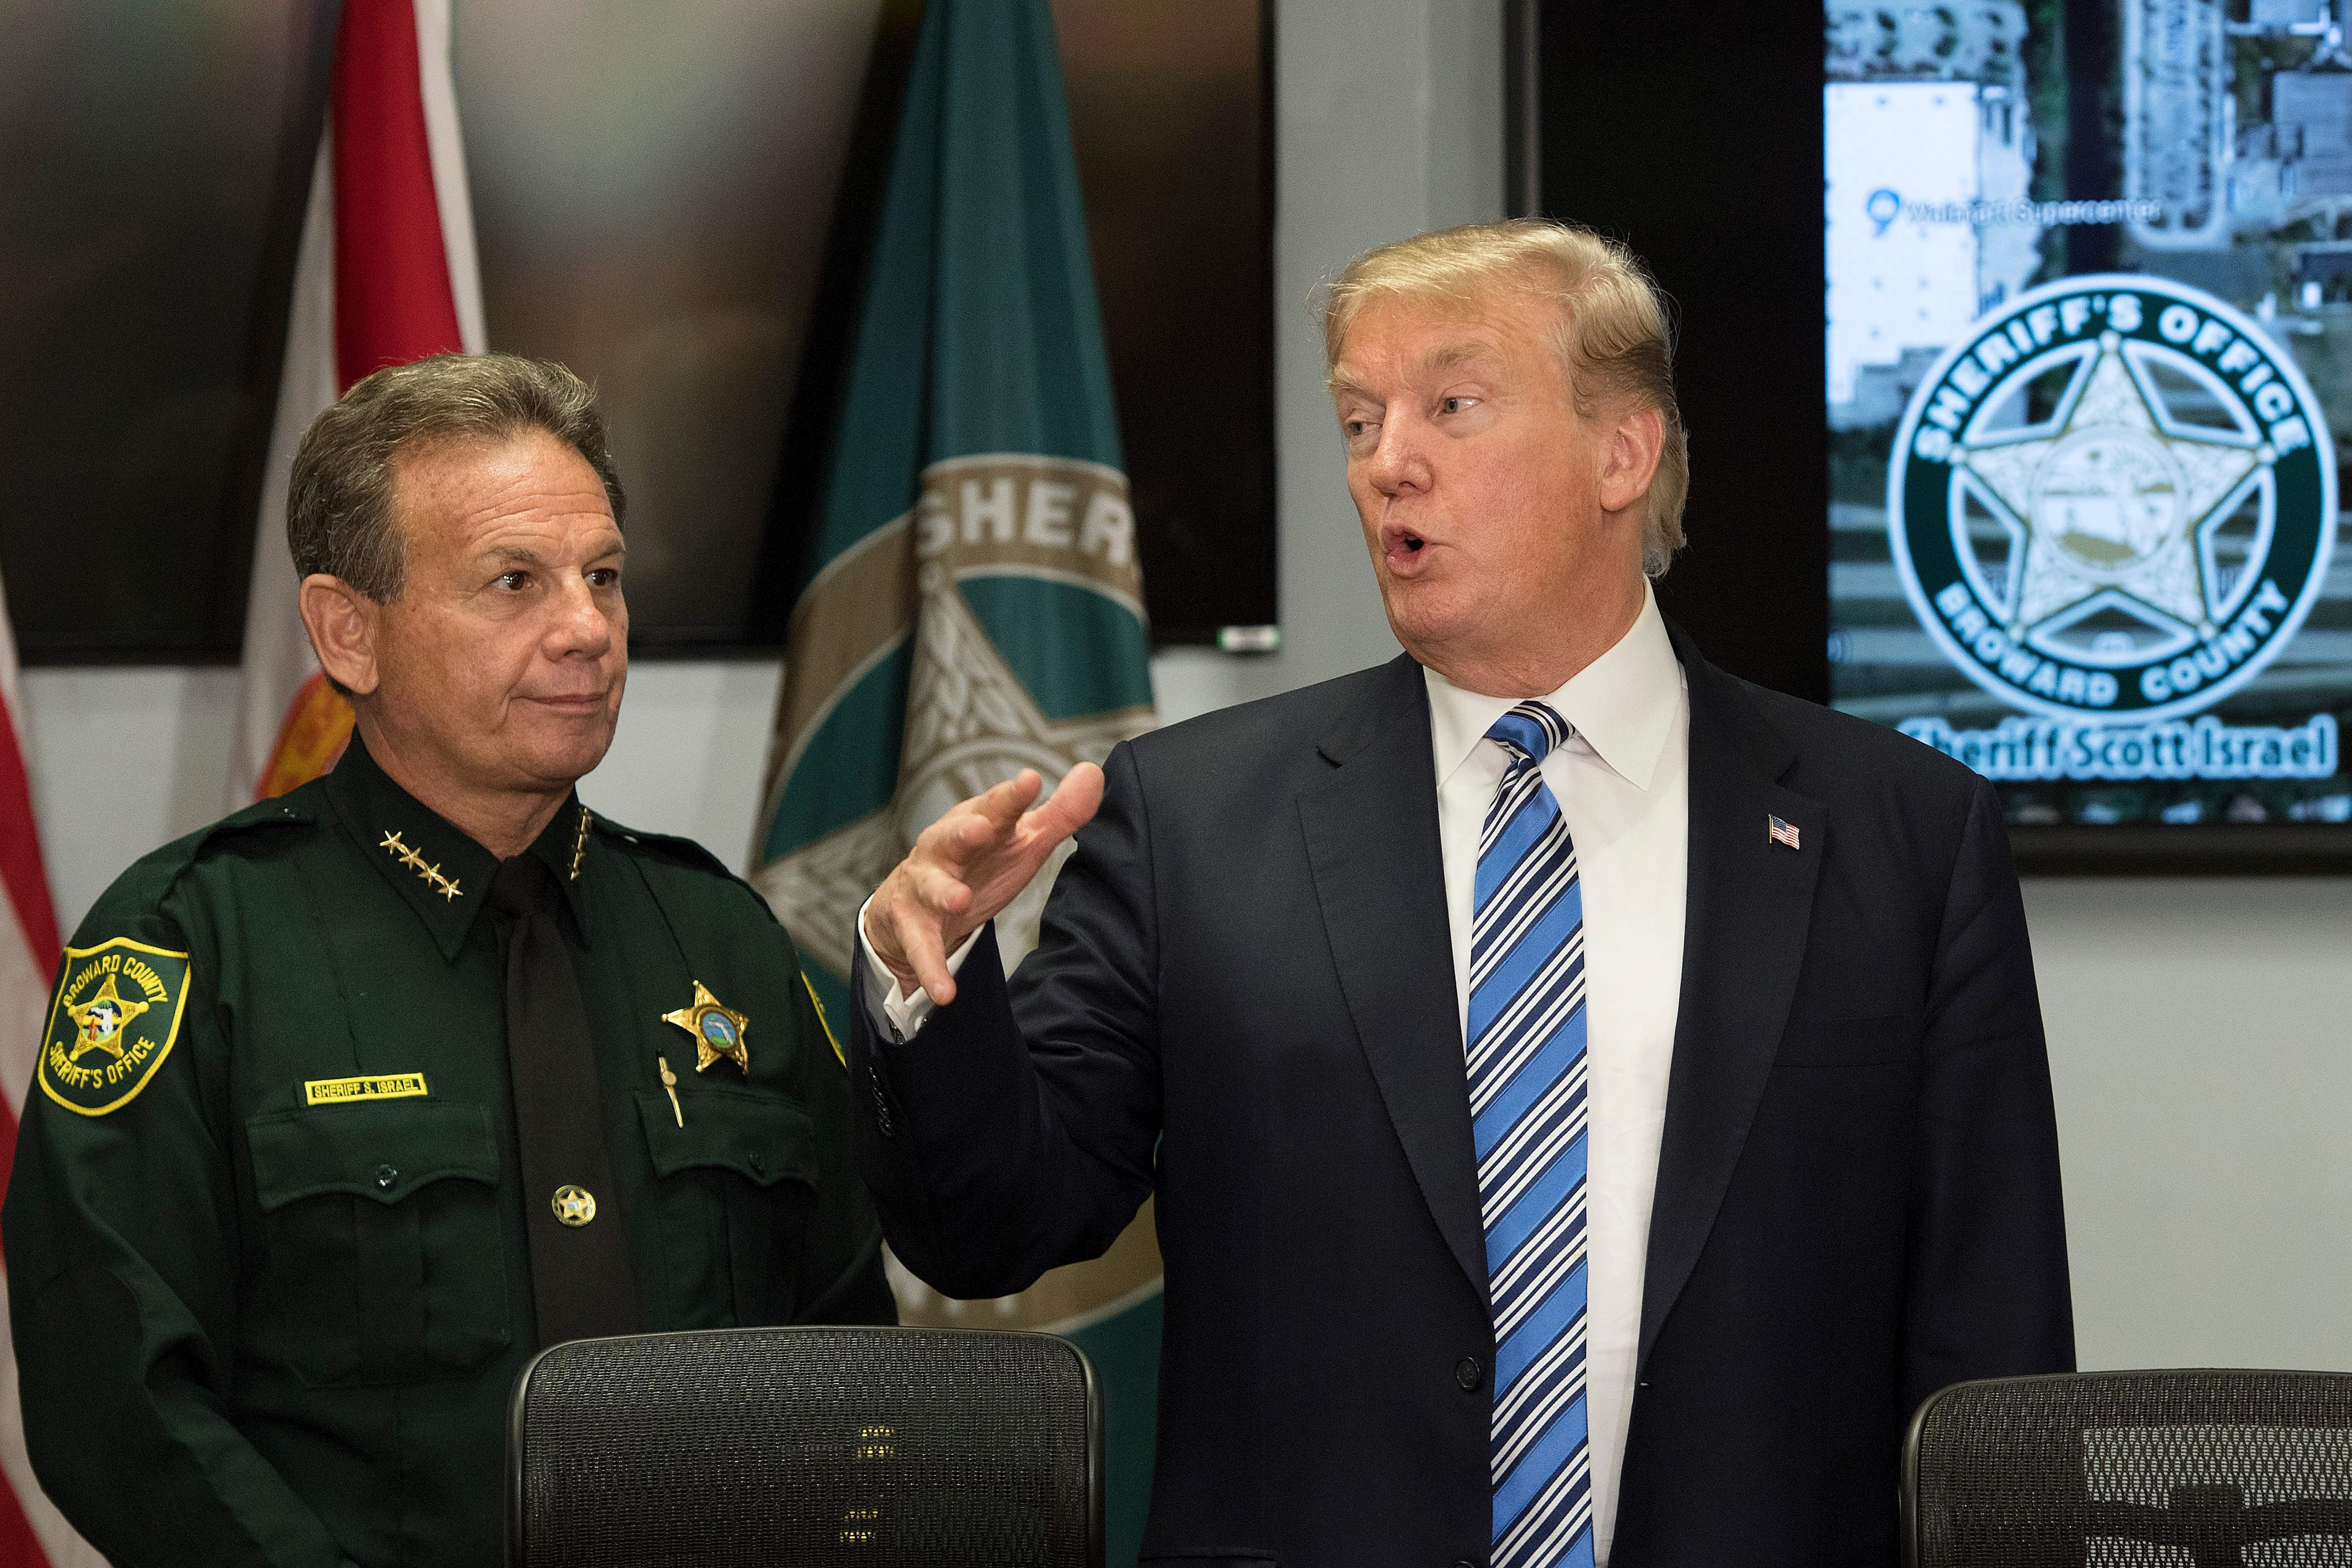 US President Donald Trump (R) speaks with Broward County Sheriff Scott Israel (L) while visiting first responders at Broward County Sheriff's Office in Pompano Beach, Florida, on February 16, 2018, three days after a mass shooting that claimed 17 lives at a nearby high school.